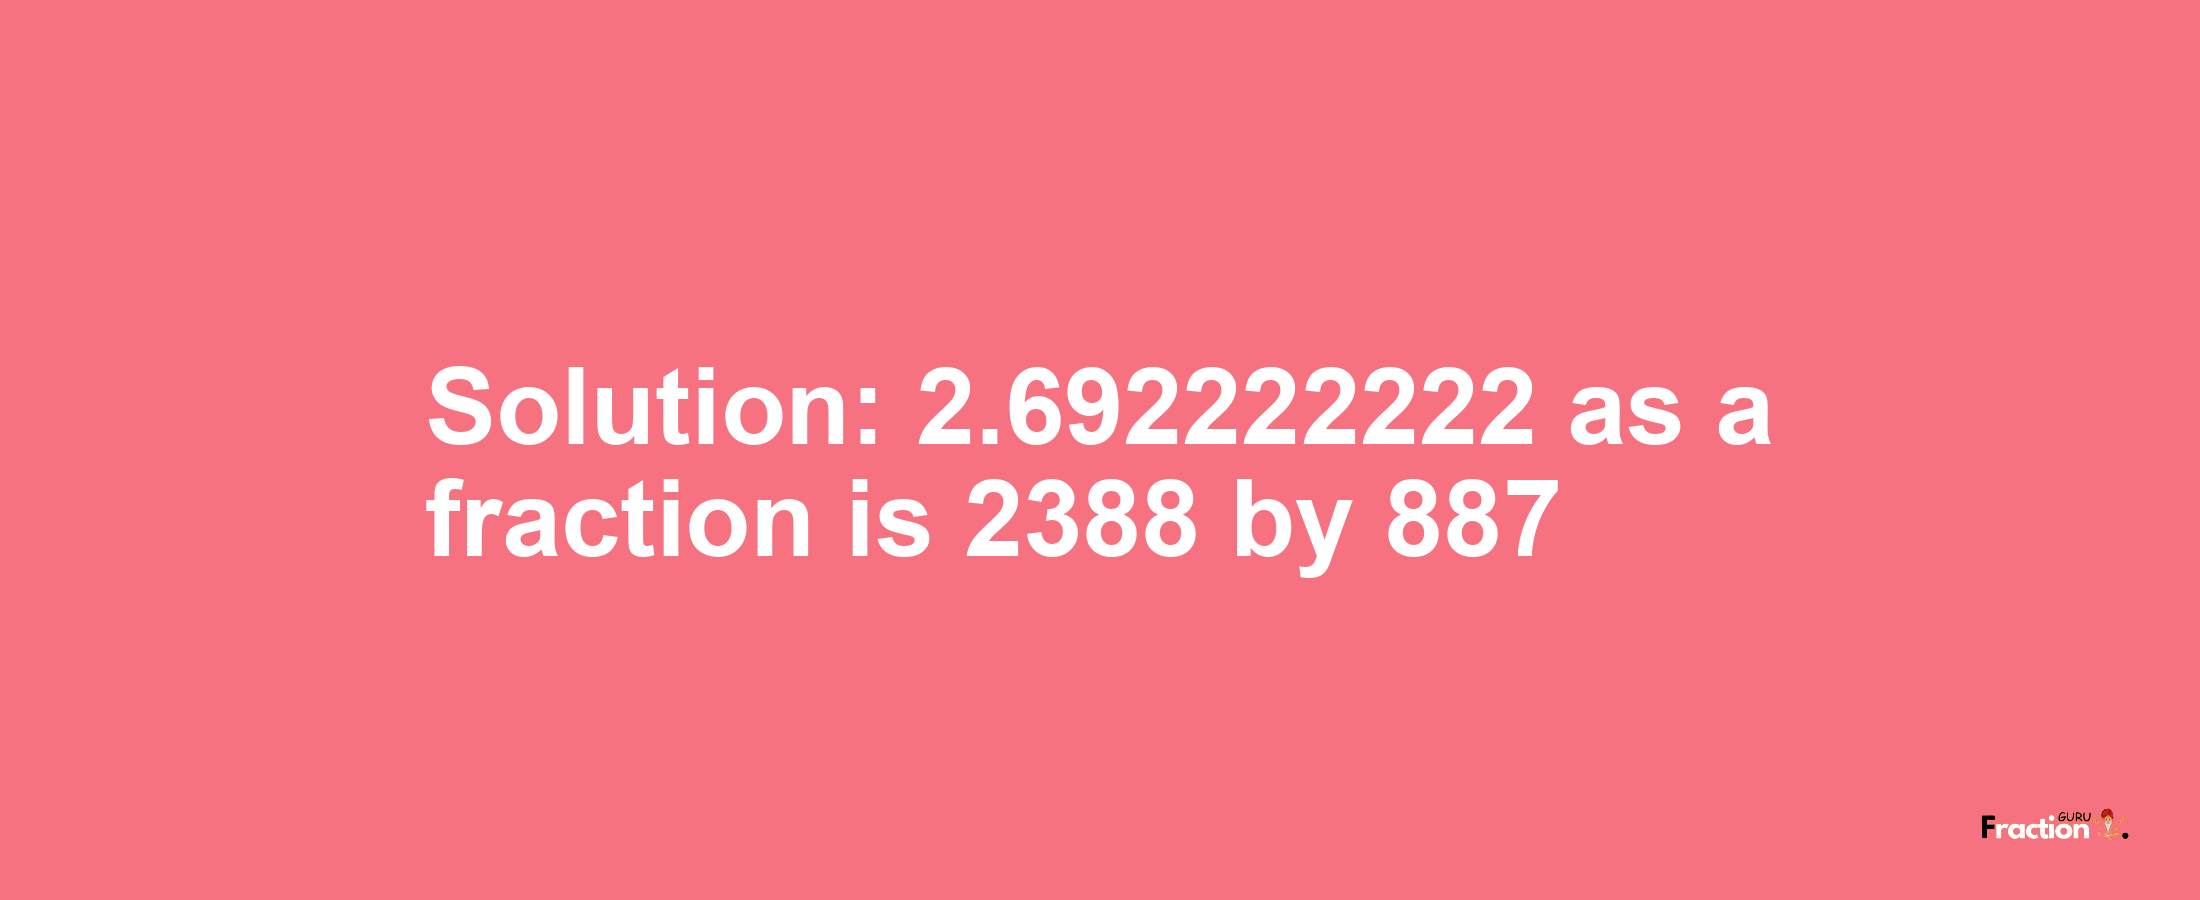 Solution:2.692222222 as a fraction is 2388/887